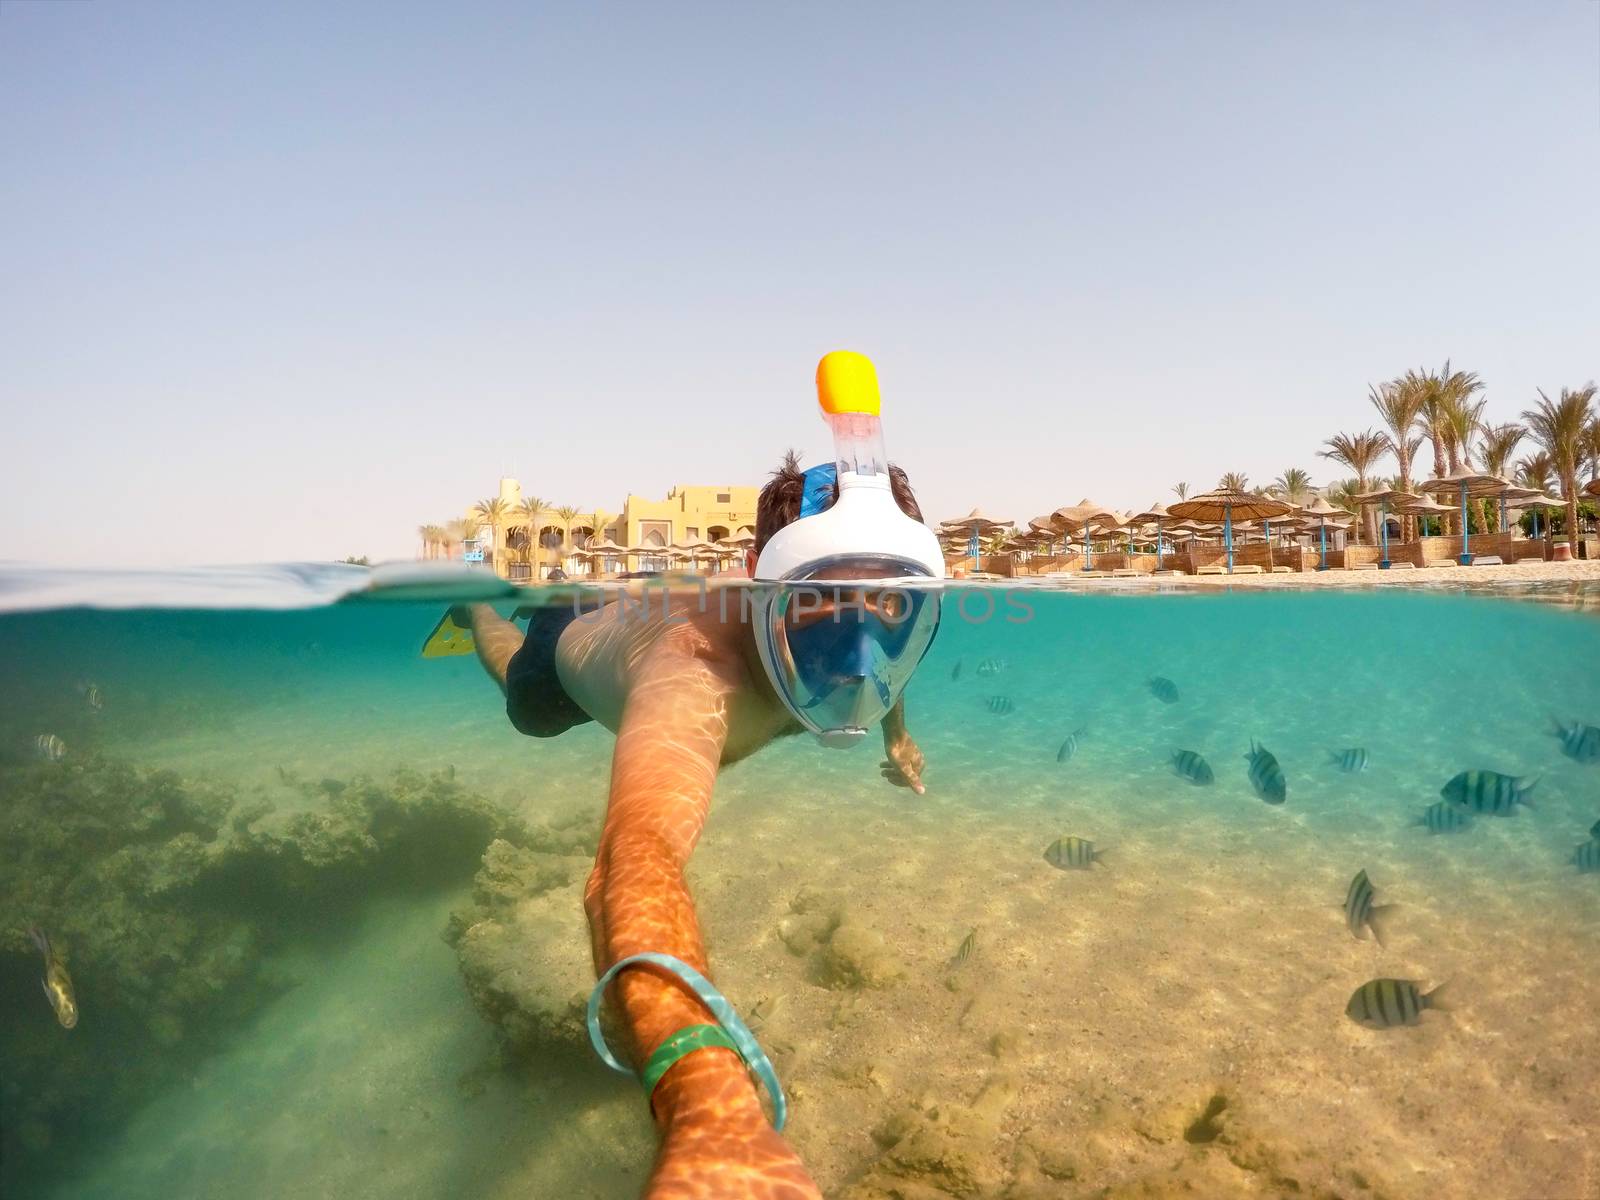 Snorkel swim in shallow water with coral fish, Red Sea, Egypt by artush